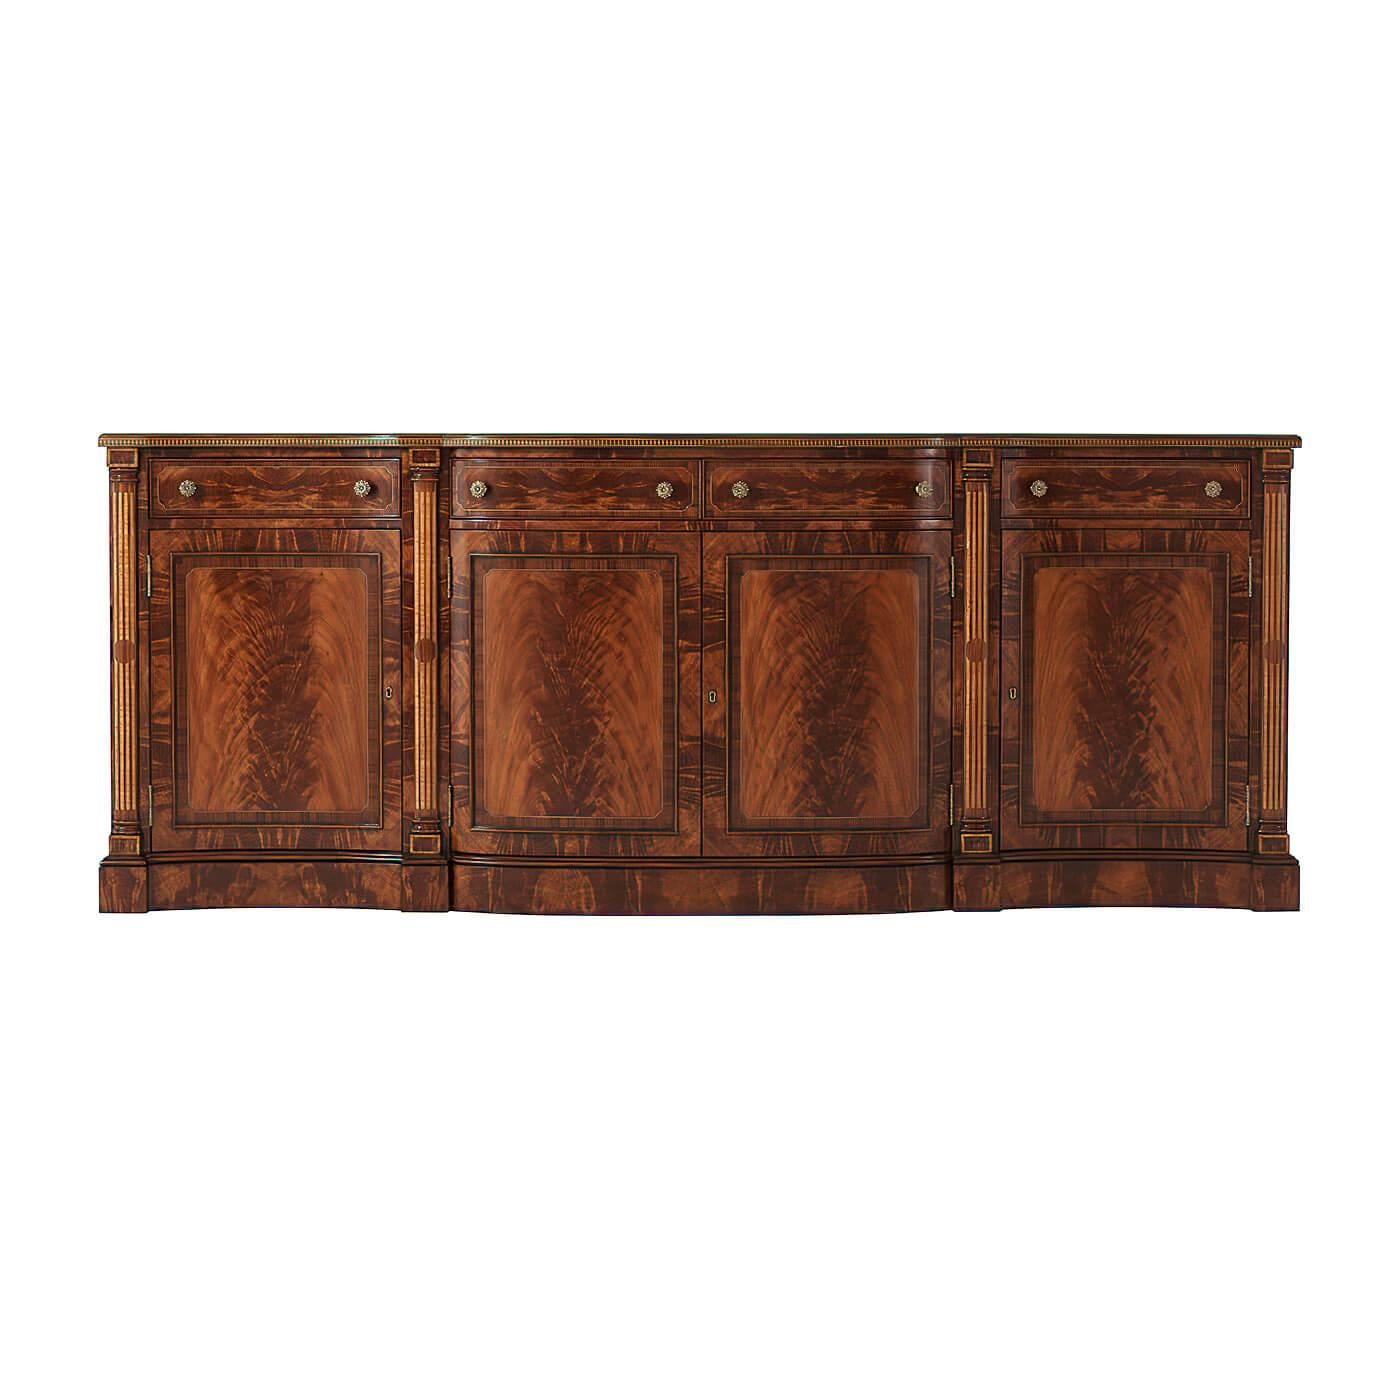 A fine Regency Serpentine credenza with flame mahogany and Morado banding, with Fine double stringing in sycamore and ebony, the serpentine crossbanded top above four frieze drawers, above four paneled cabinet and lockable cabinet doors flanked by